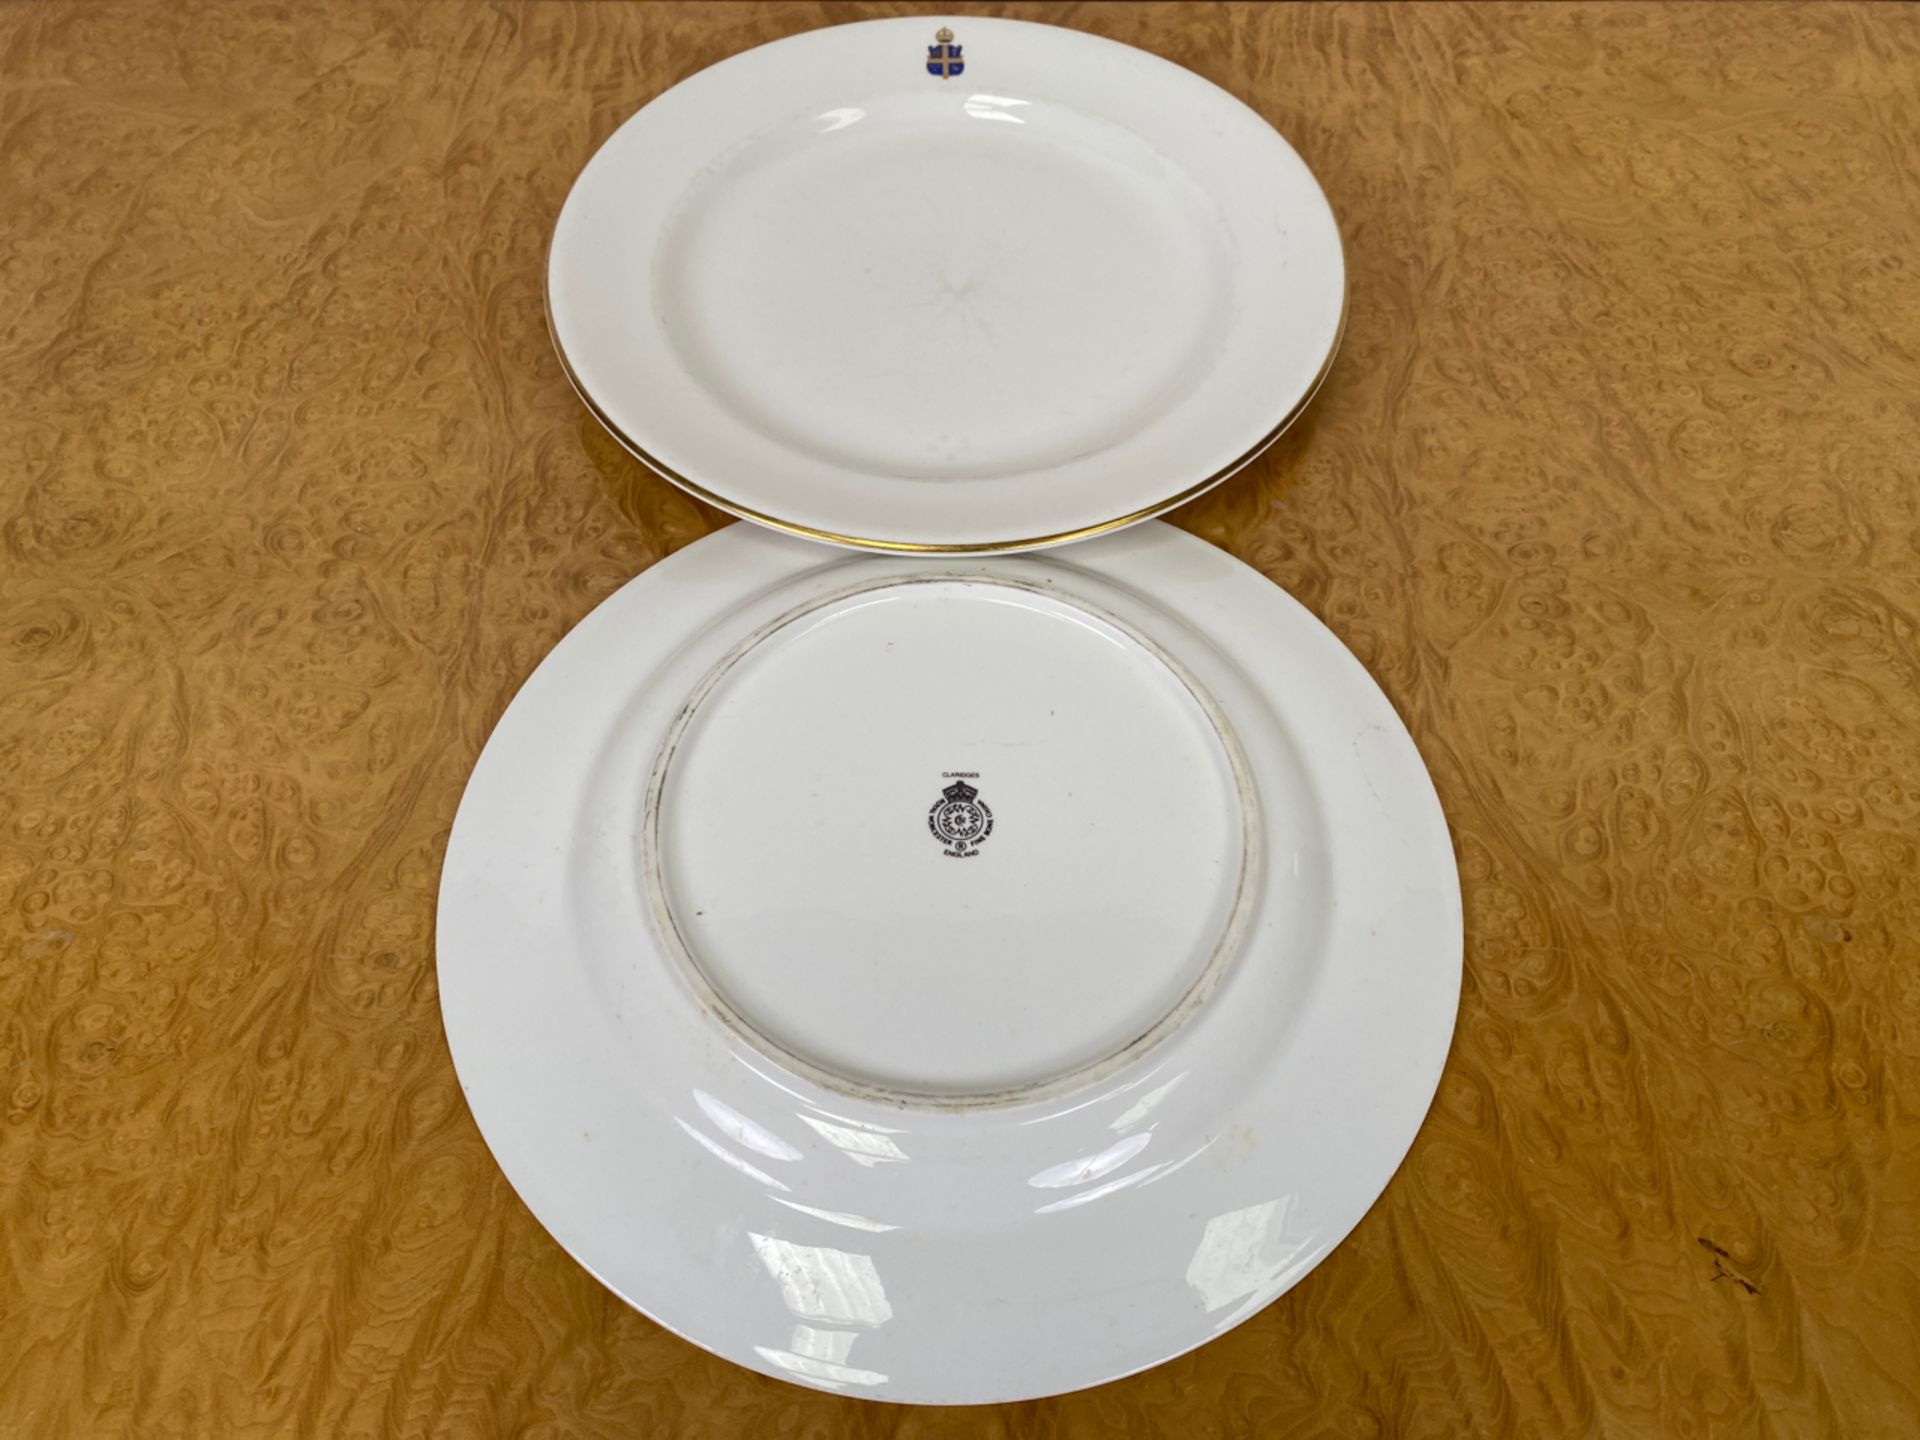 Set of Crested Crockery for Claridge's by Chommette 1884 - Image 29 of 43